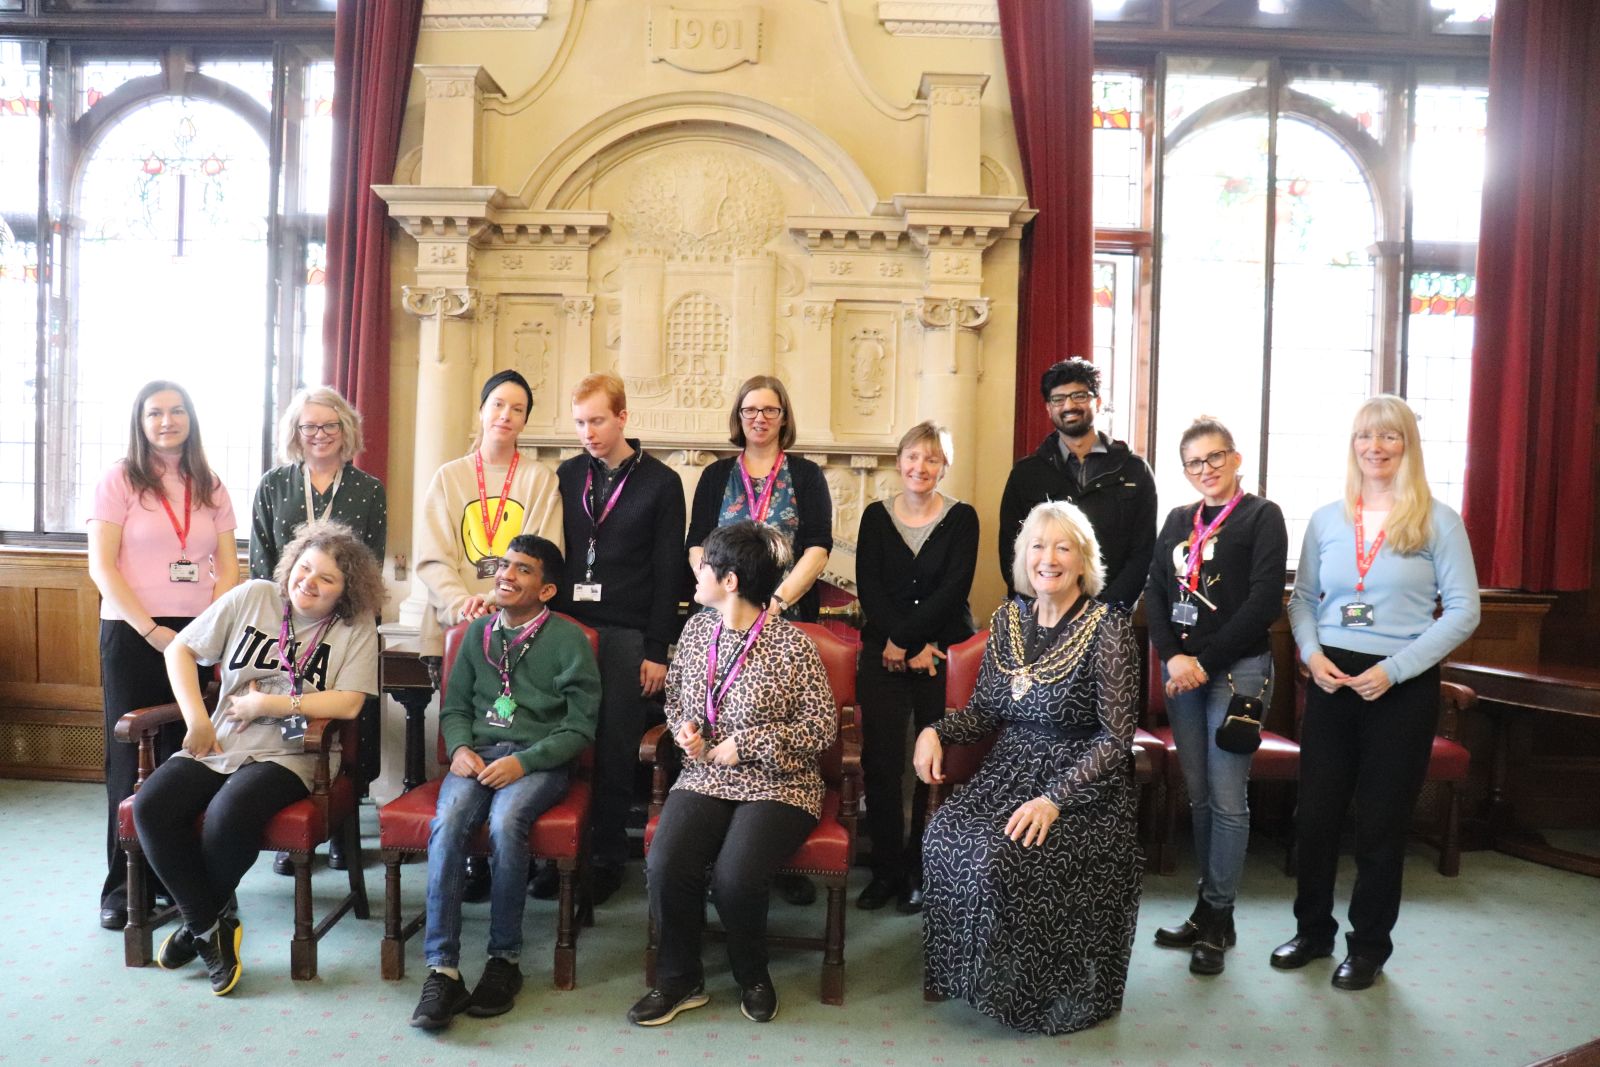 Life Skills - SEND students from East Surrey College, pictured with their tutor and Learning Support Assistants, and Cllr Jill Bray, Mayor of Reigate & Banstead. 